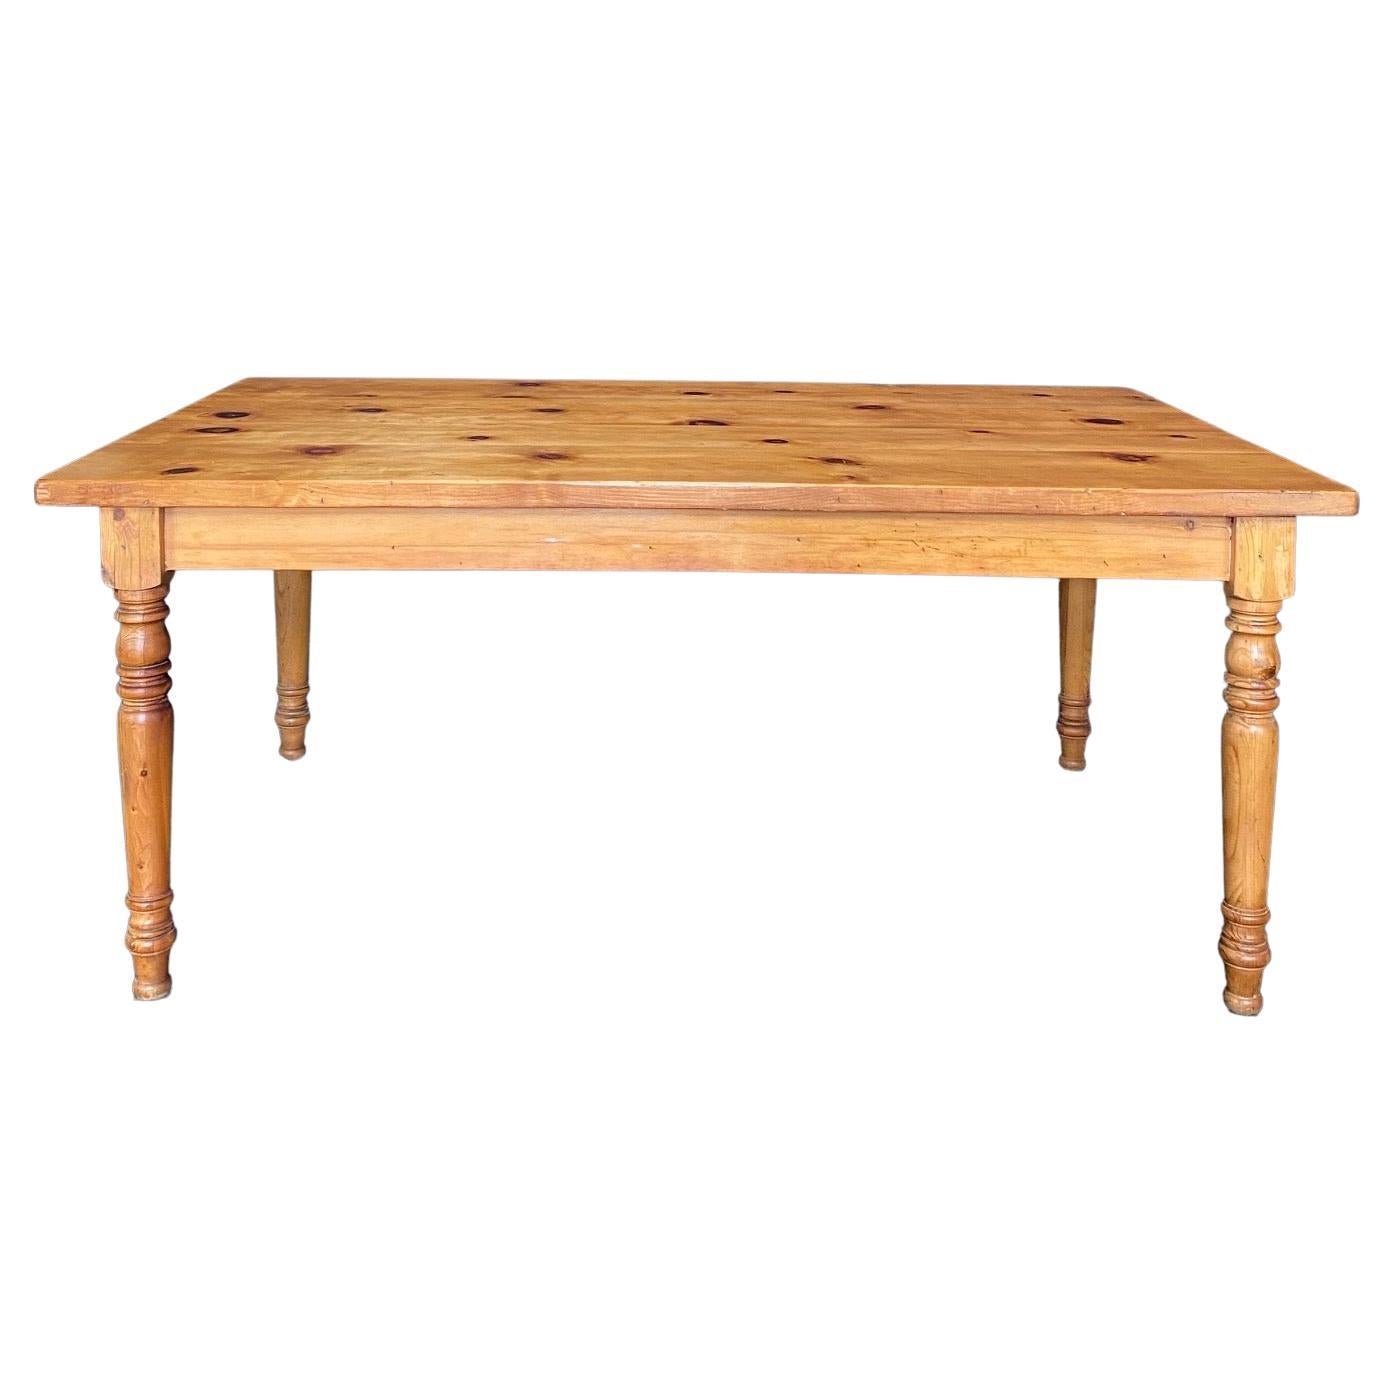 Charming & Welcoming British Country Antique Pine Farmhouse Dining Table For Sale